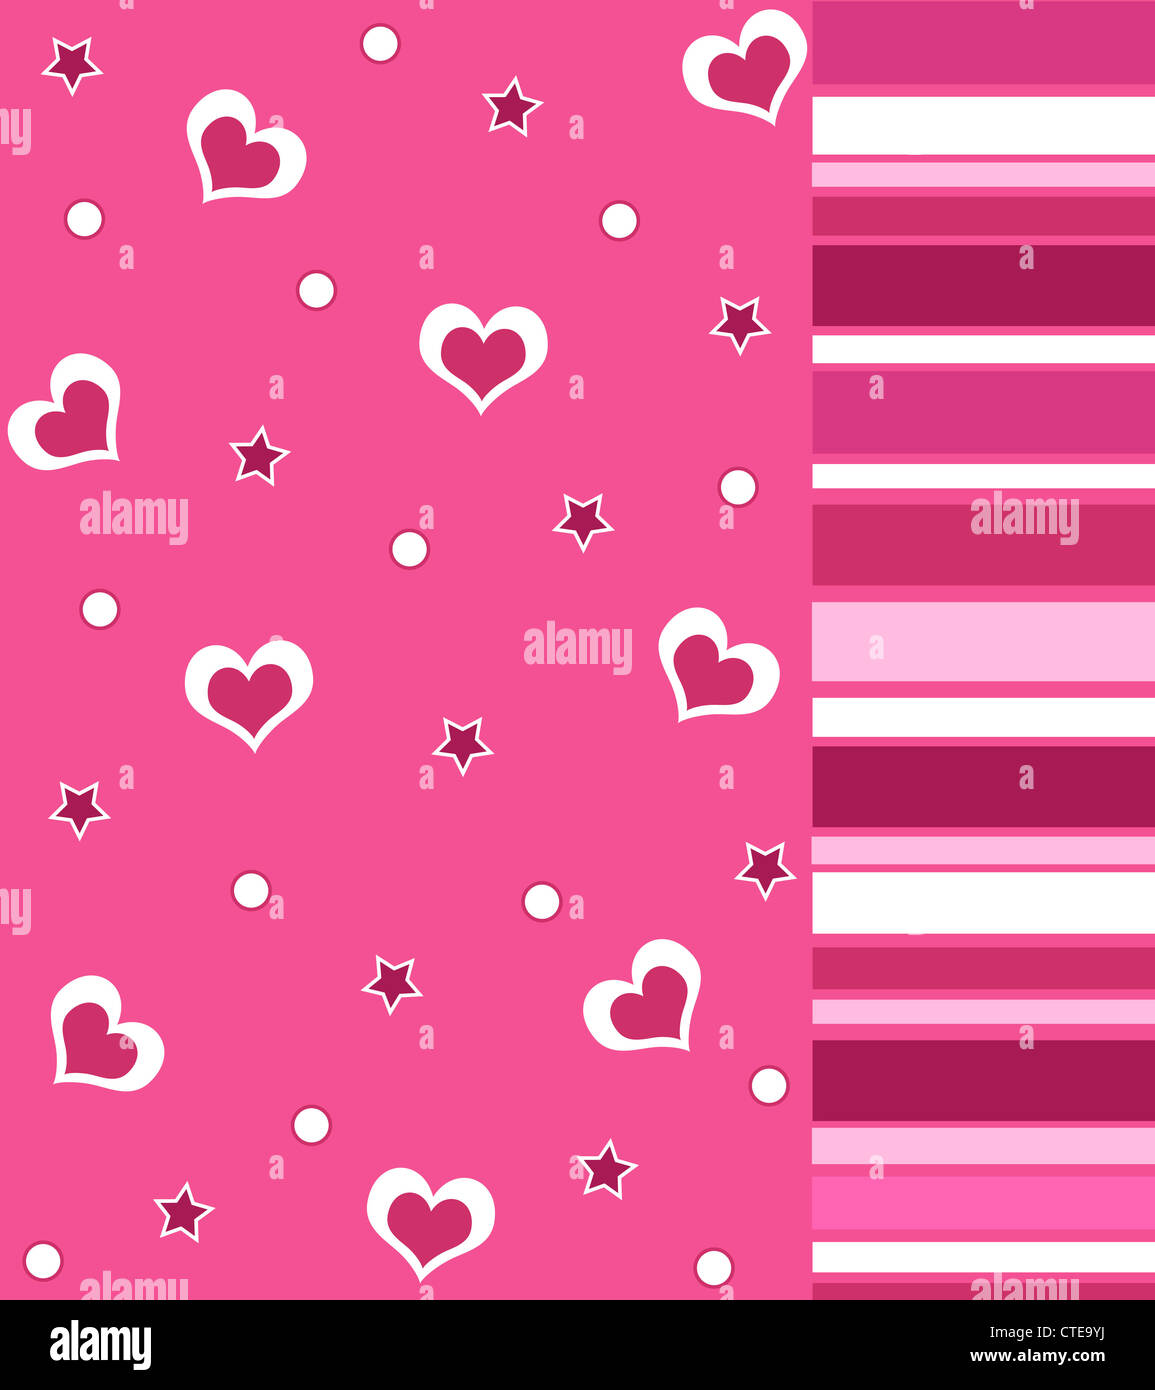 Hearts, stars and stripes in pink and white colors Stock Photo